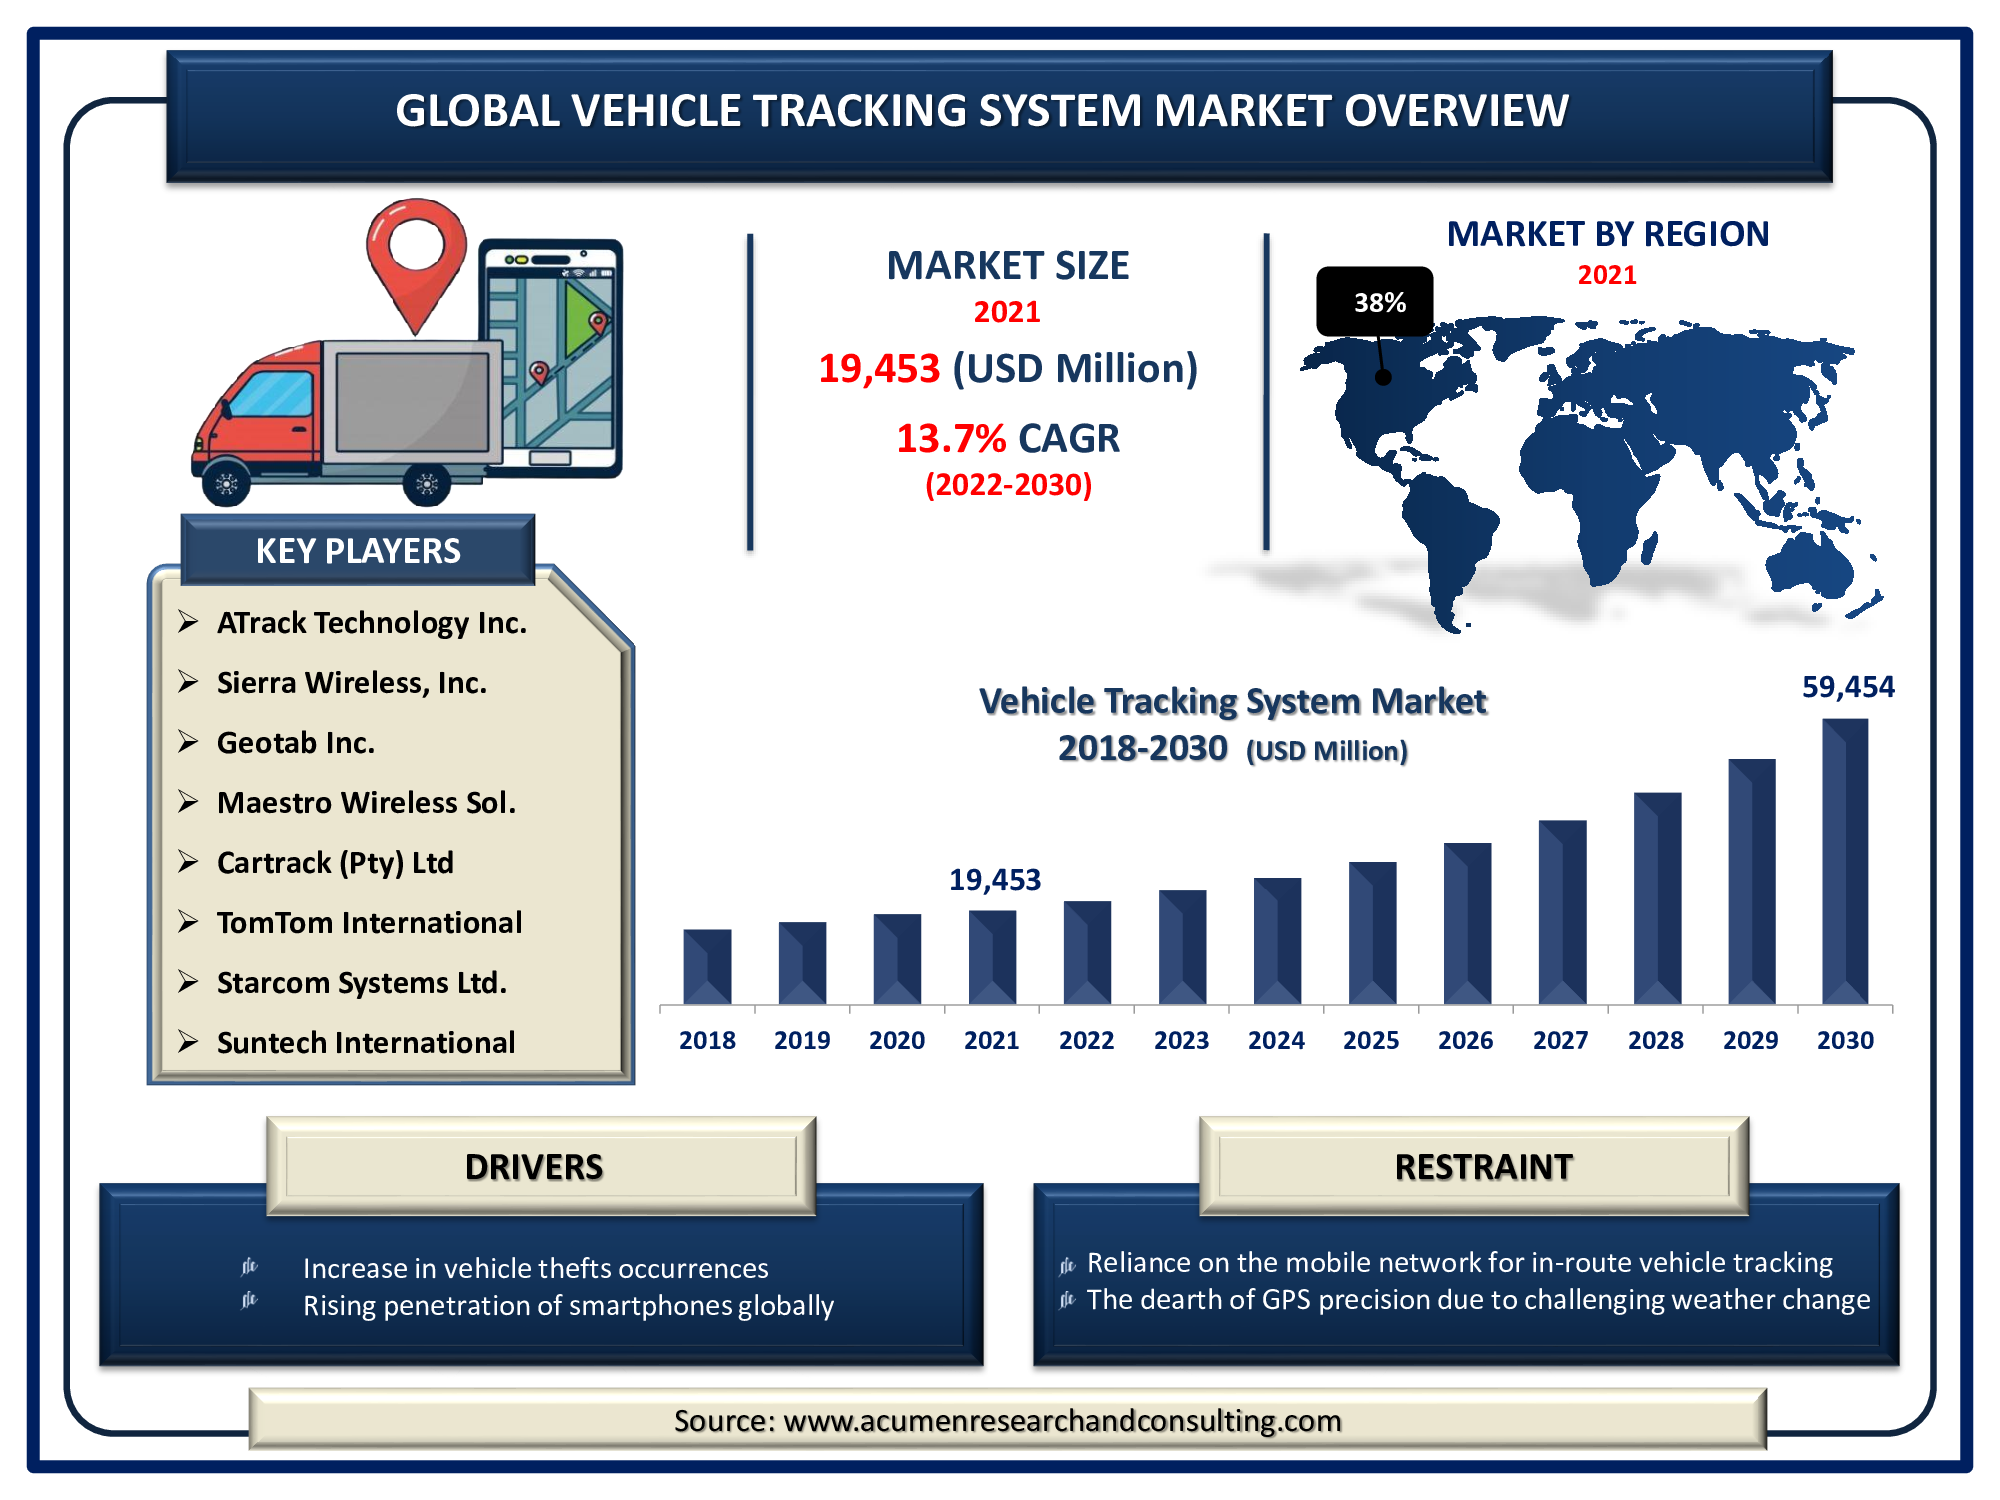 GPS (Global Positioning System) Tracking System Market Growth Rate, Share,  Size, Opportunity, Demand & Forecast By 2030